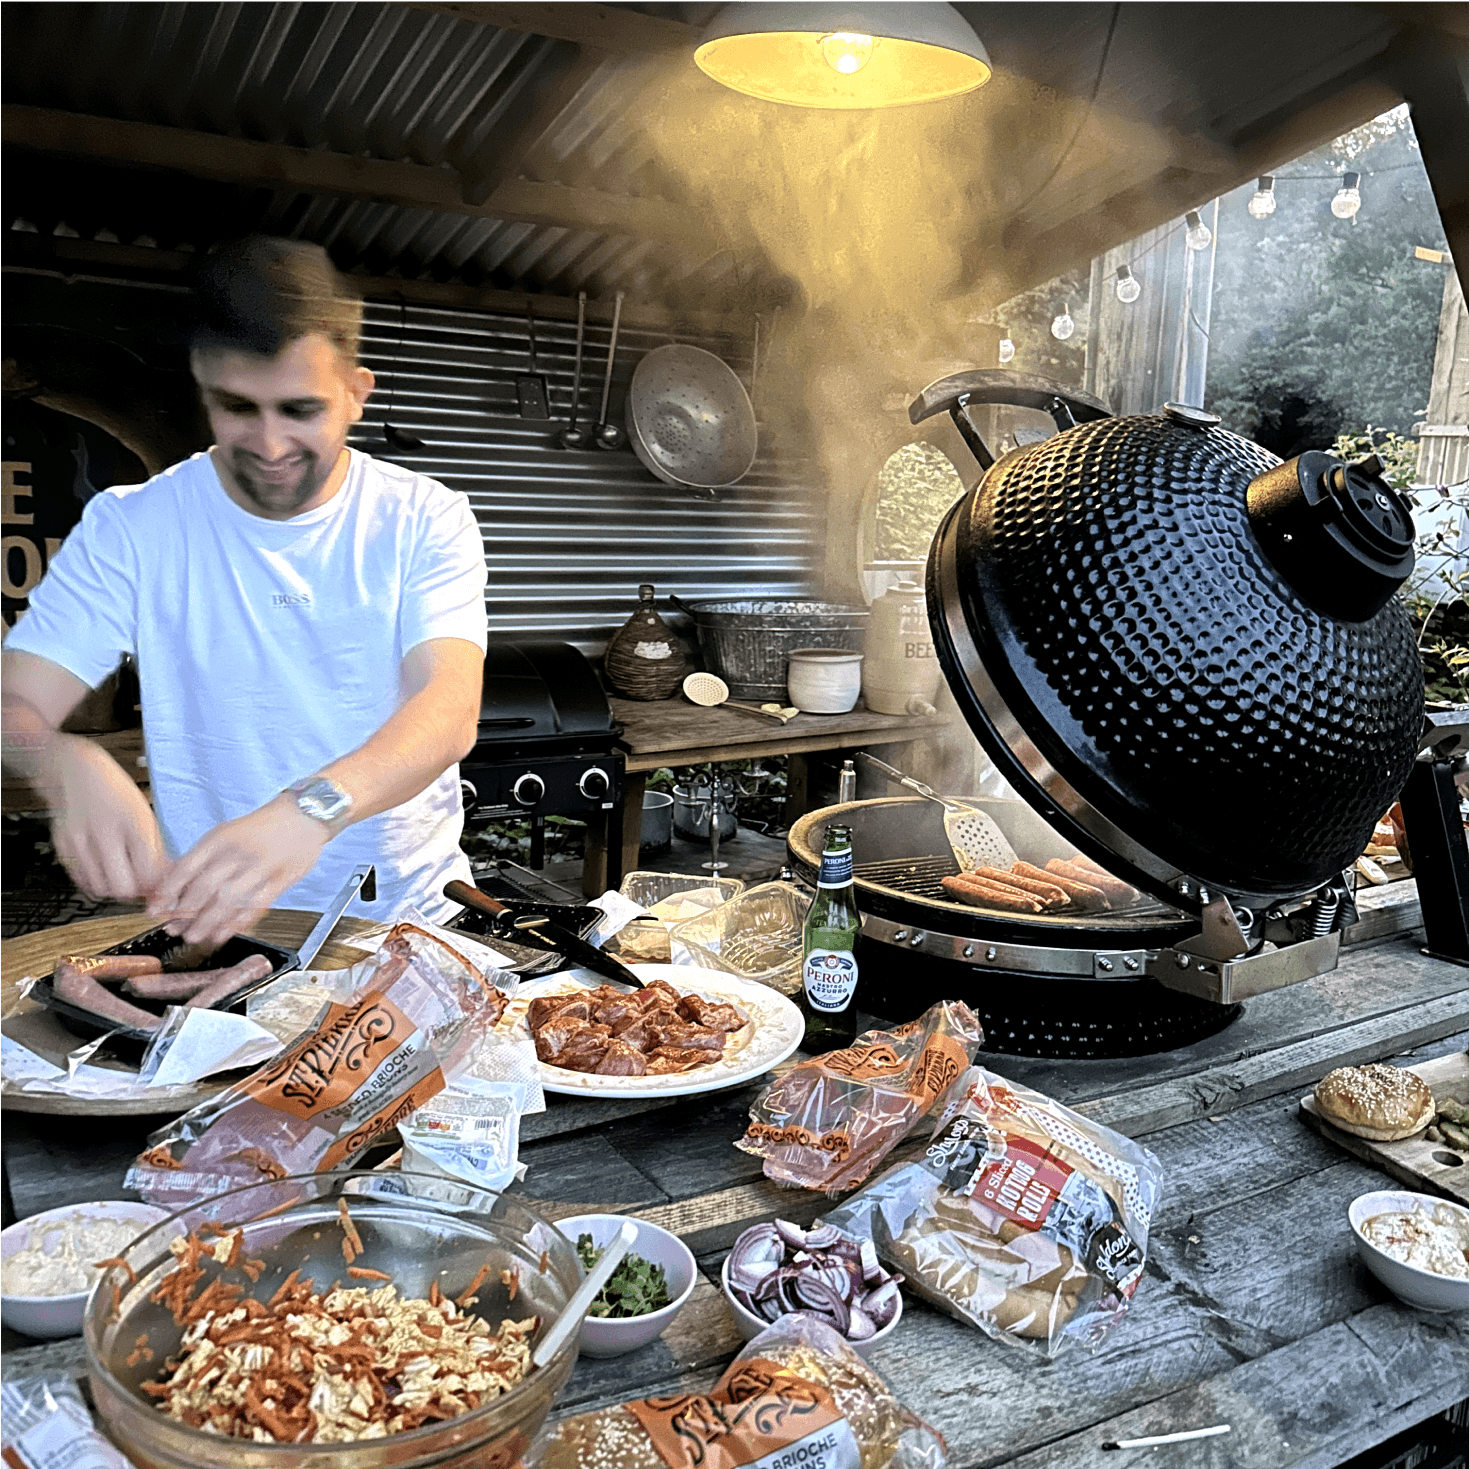 Member of the team doing a barbecue